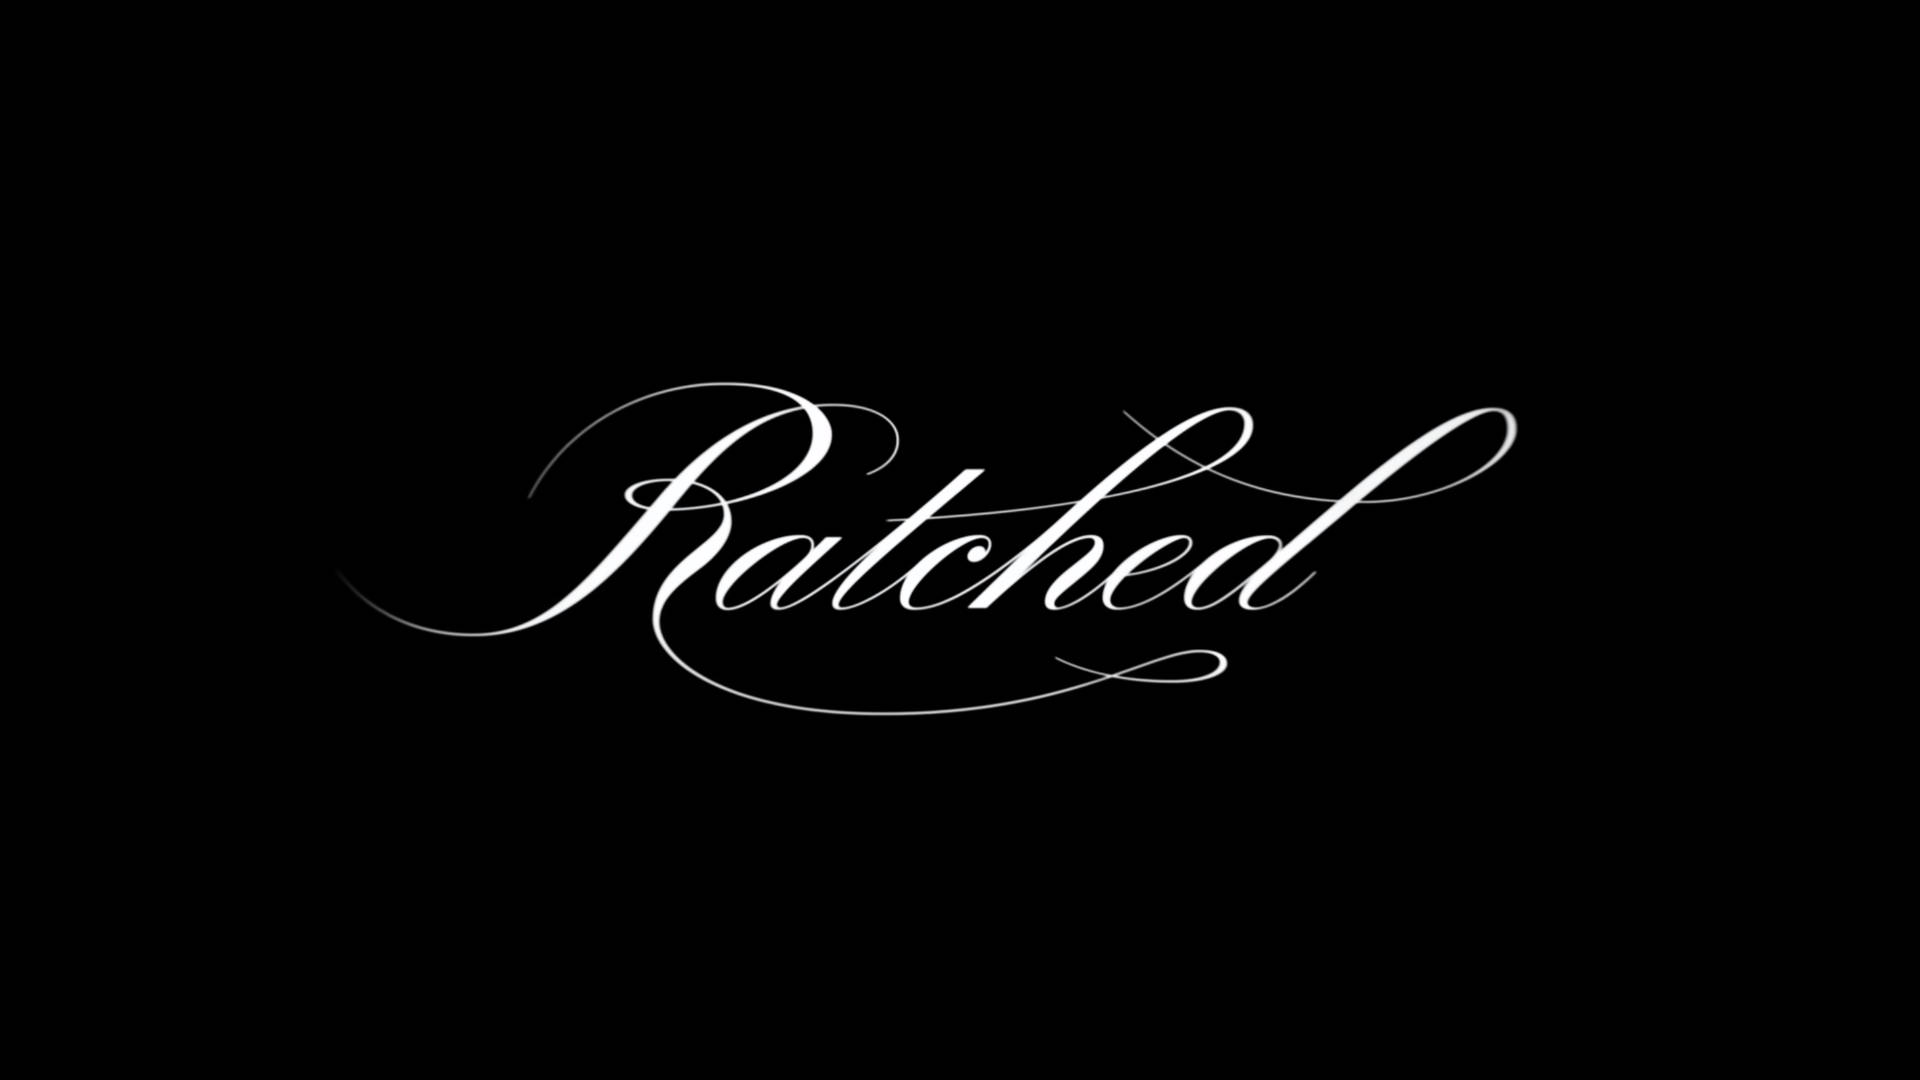 Ratched Series Logo Wallpaper